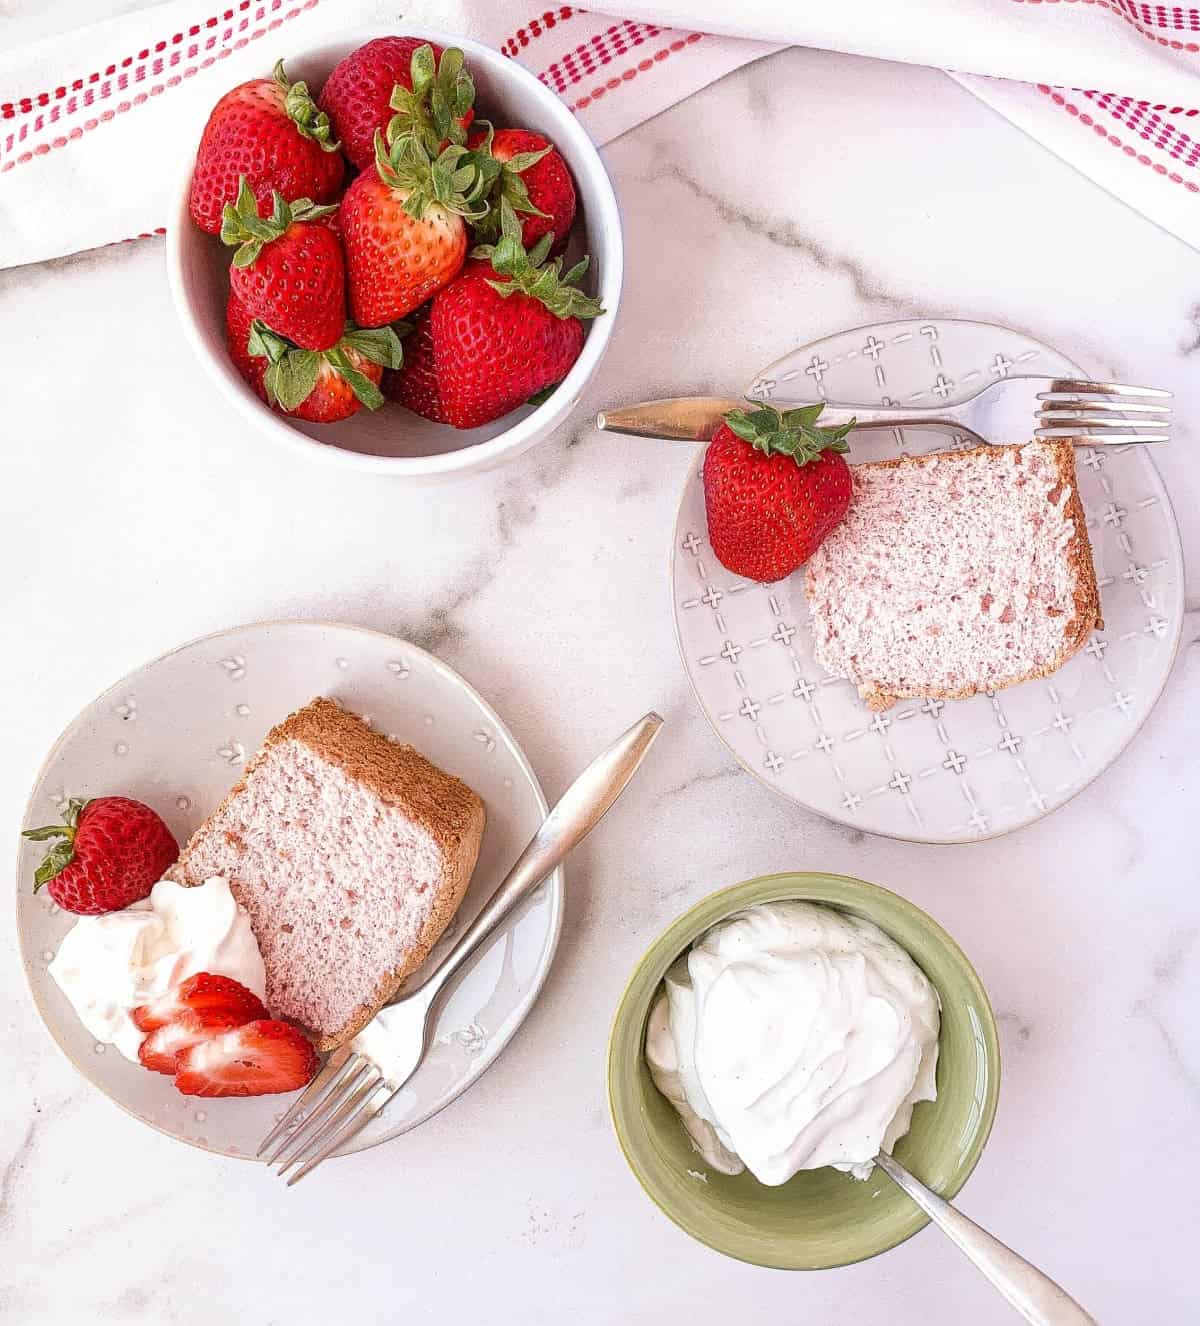 View of slices of Strawberry Angel Food Cake on plates from above.